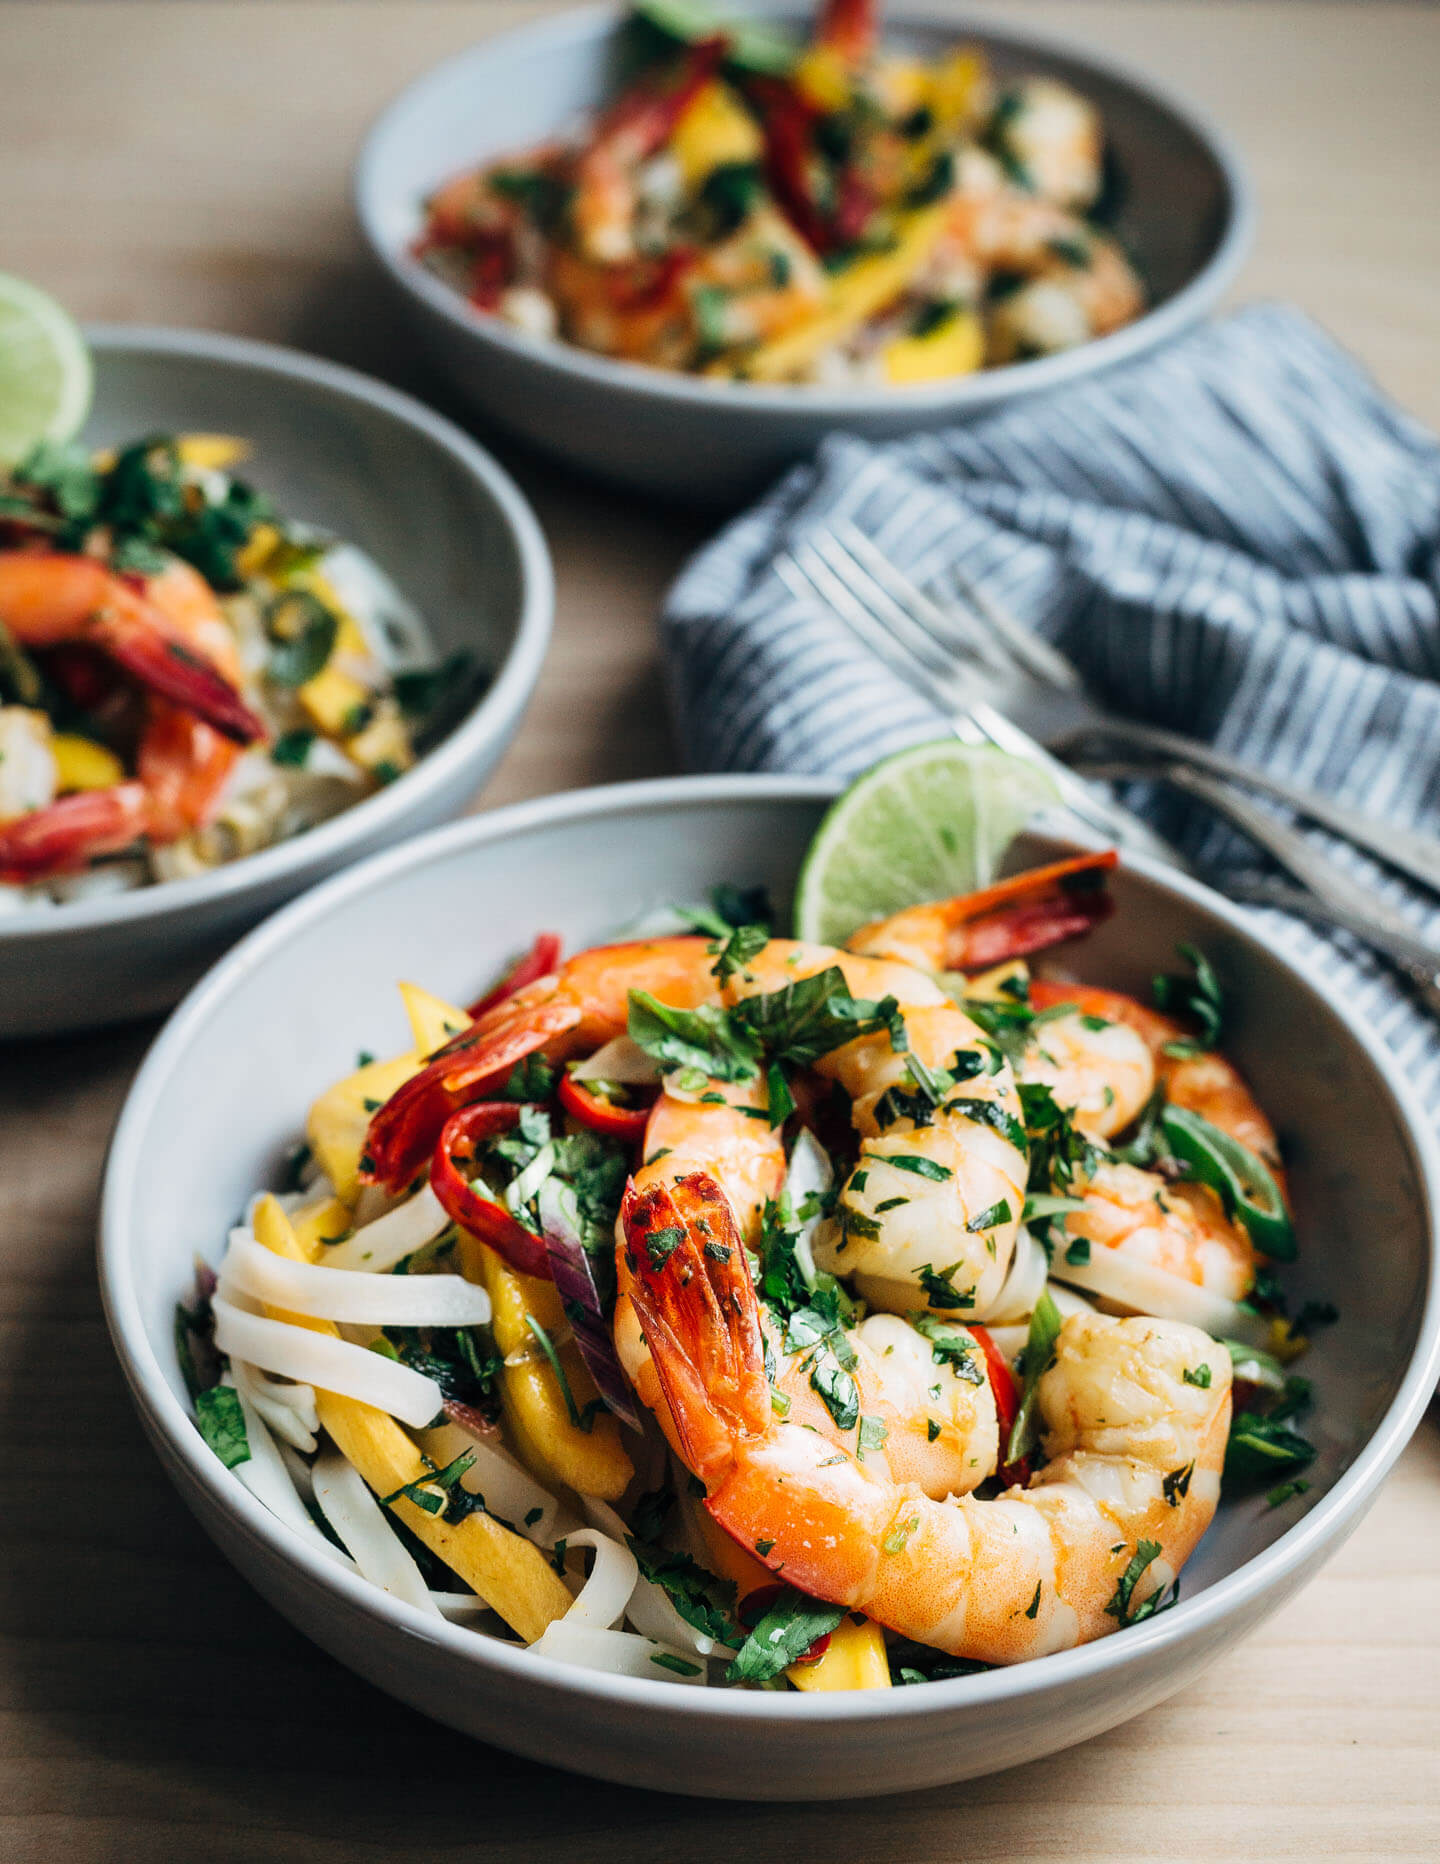 Fresh sliced mango and shrimp seared in coconut oil tossed with chilis, herbs, rice noodles, and a simple lime sauce makes for a nearly effortless, crazy flavorful weeknight meal.